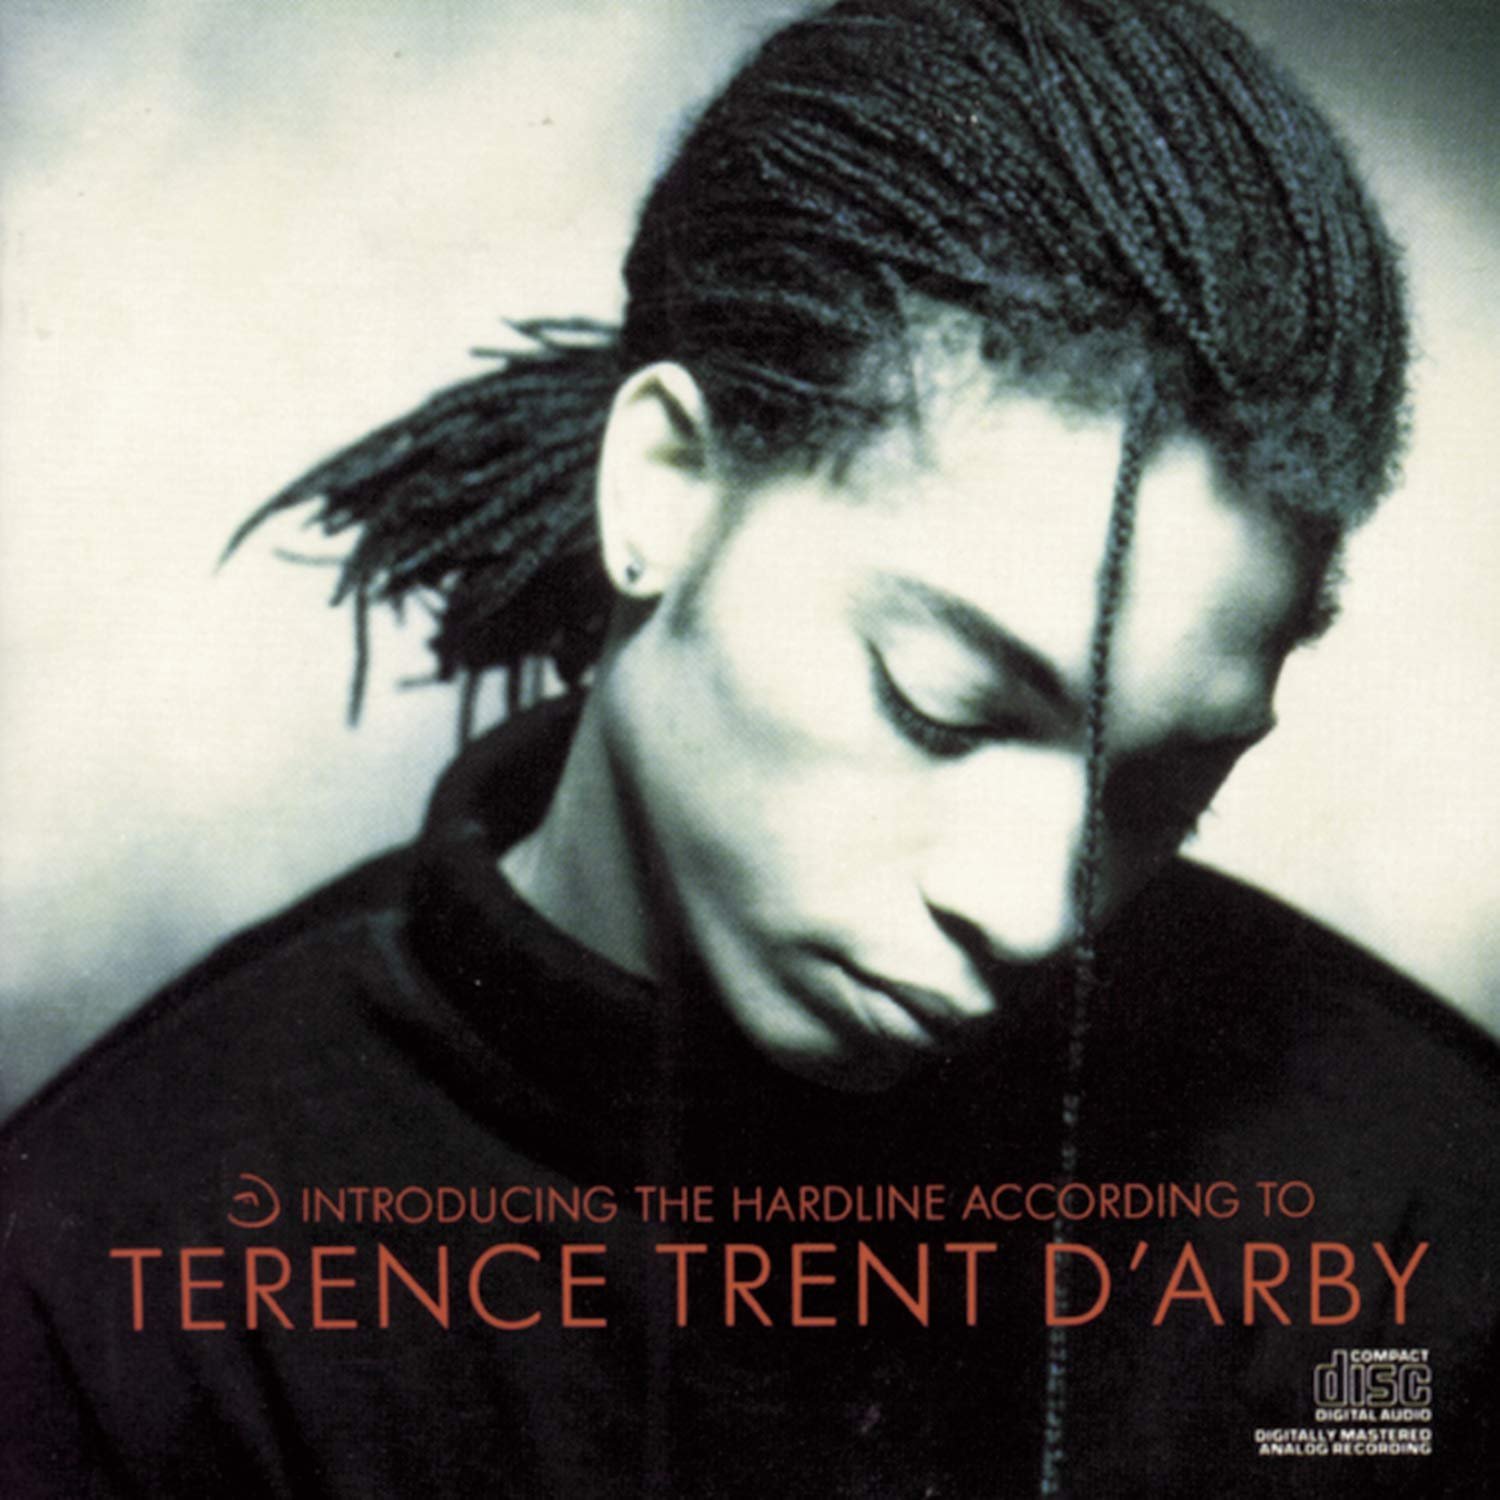 You are currently viewing Godišnjica objavljivanja debi-albuma Introducing the Hardline according to Terence Trent D’Arby